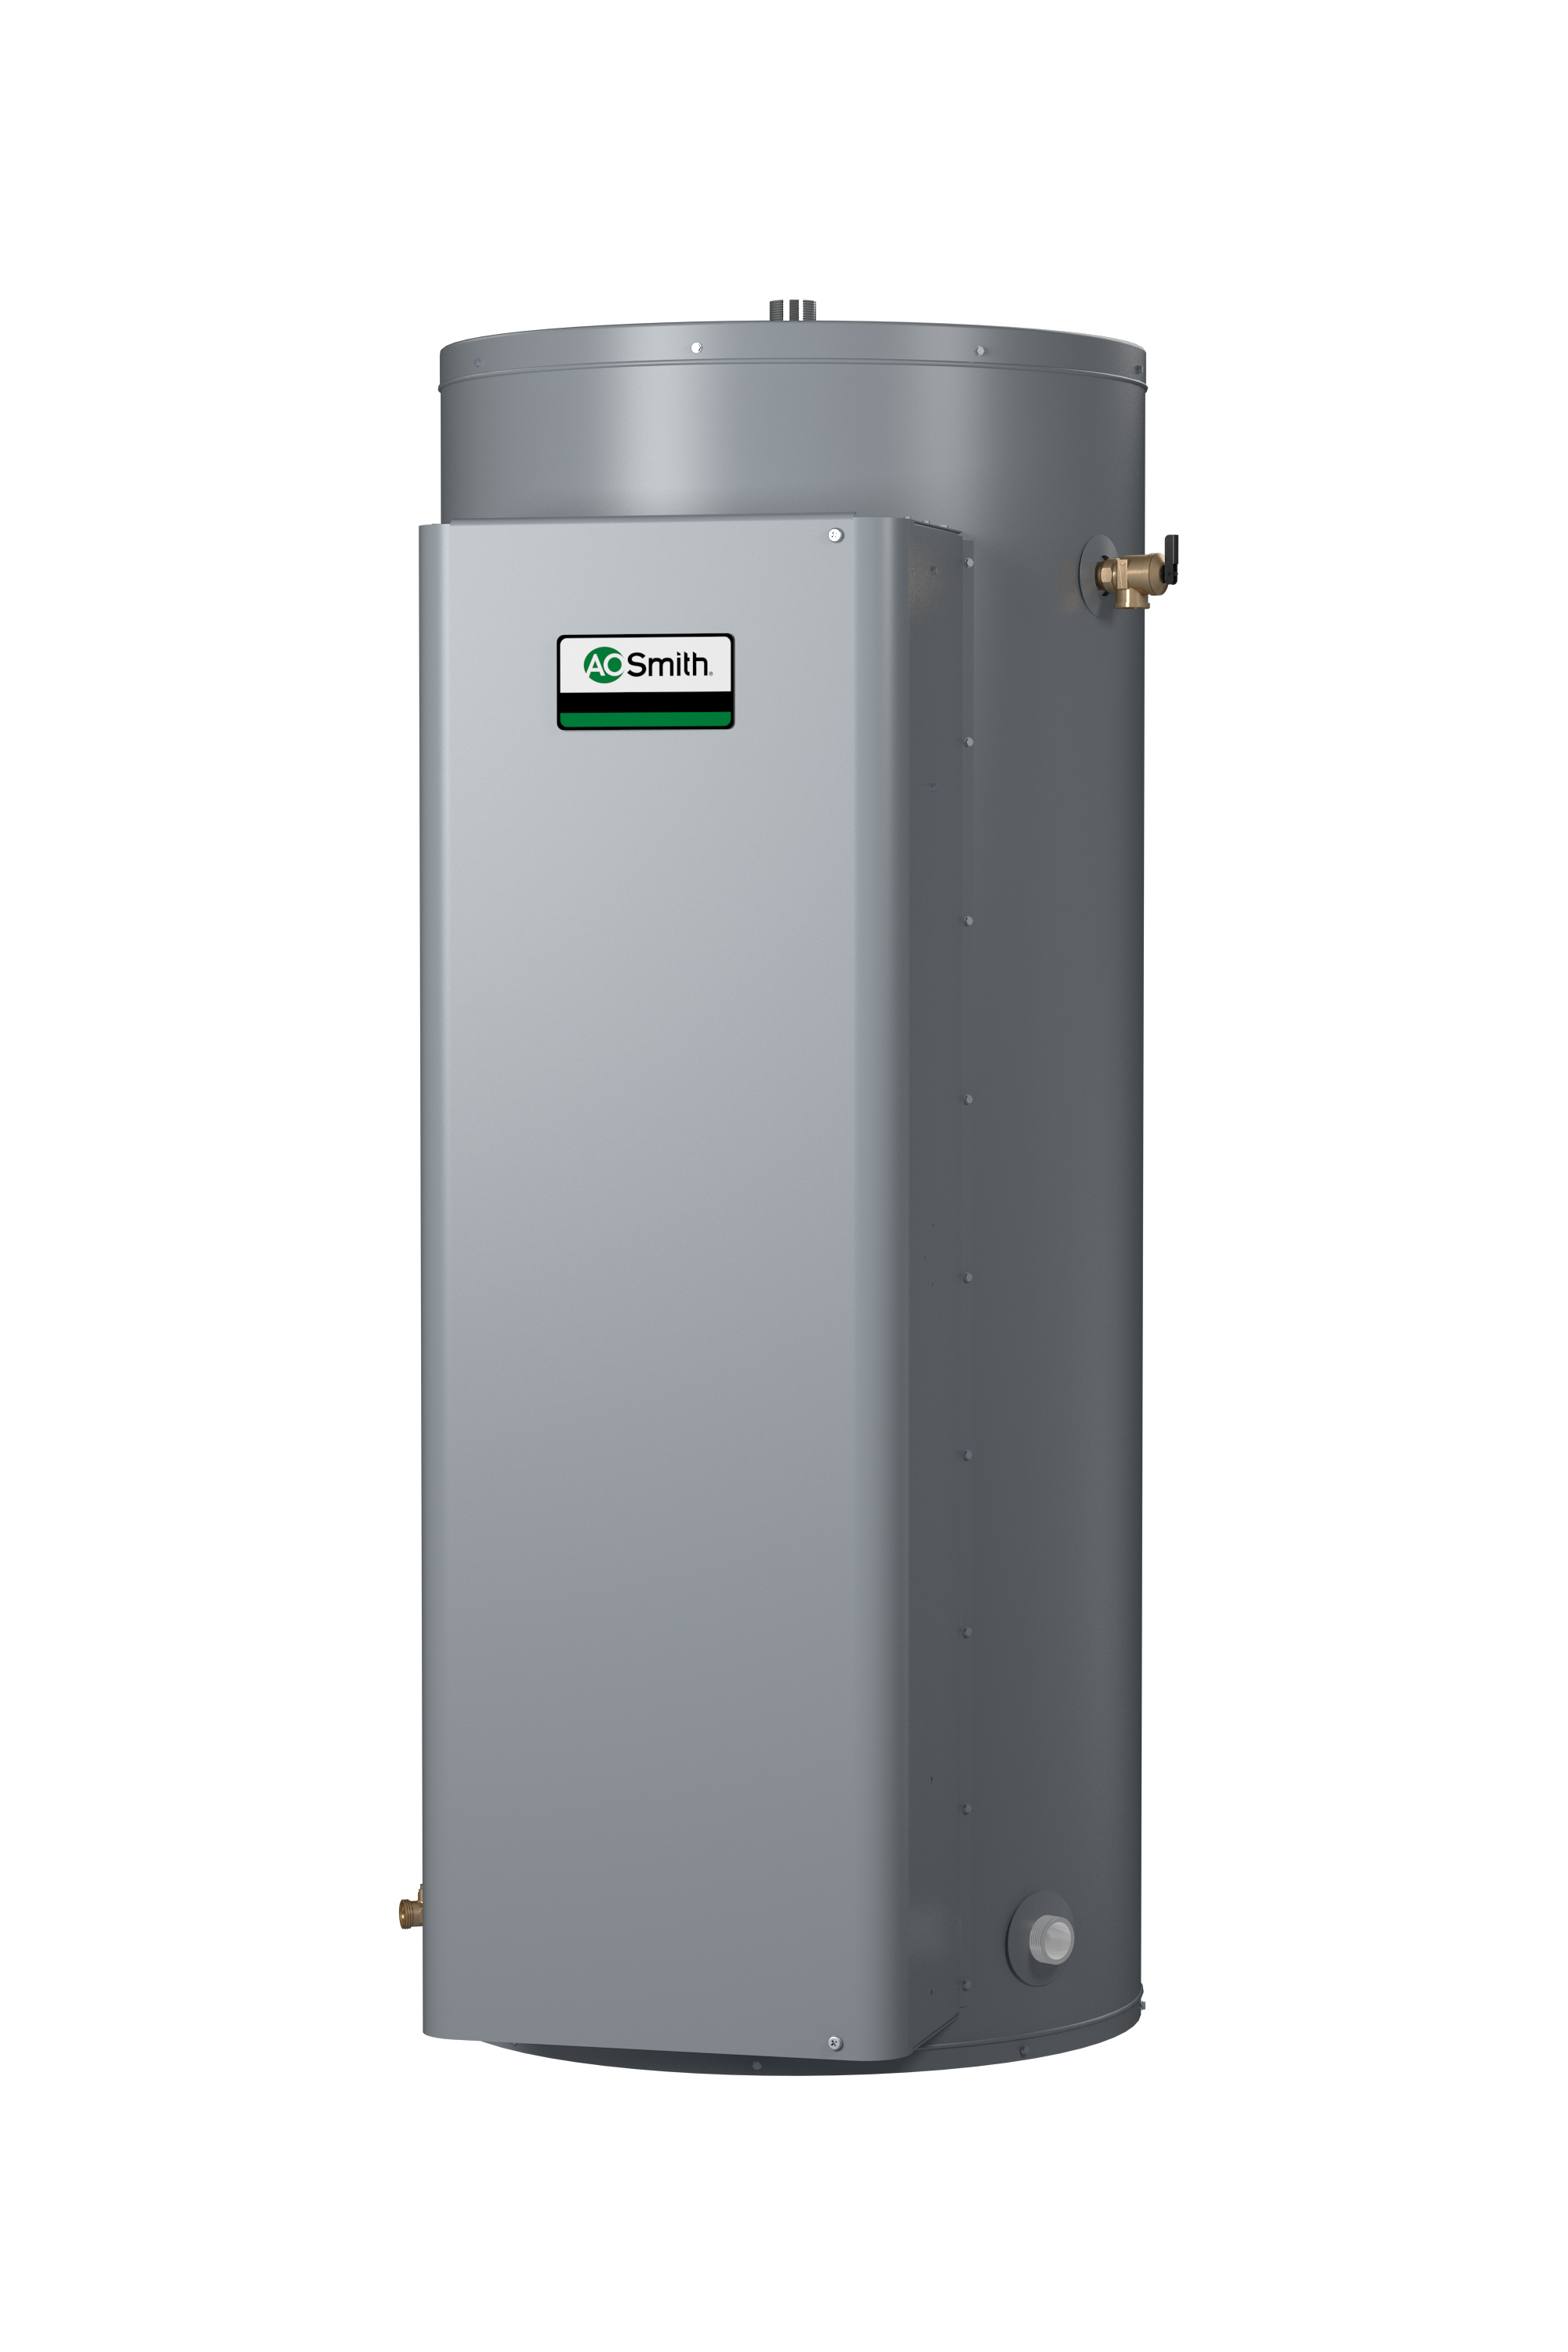 AO SMITH DRE-120-15, 119 GALLON, 15.0KW, 480 VOLT, 31.3 AMPS, 1 PHASE, 3 ELEMENT, COMMERCIAL ELECTRIC WATER HEATER, GOLD SERIES